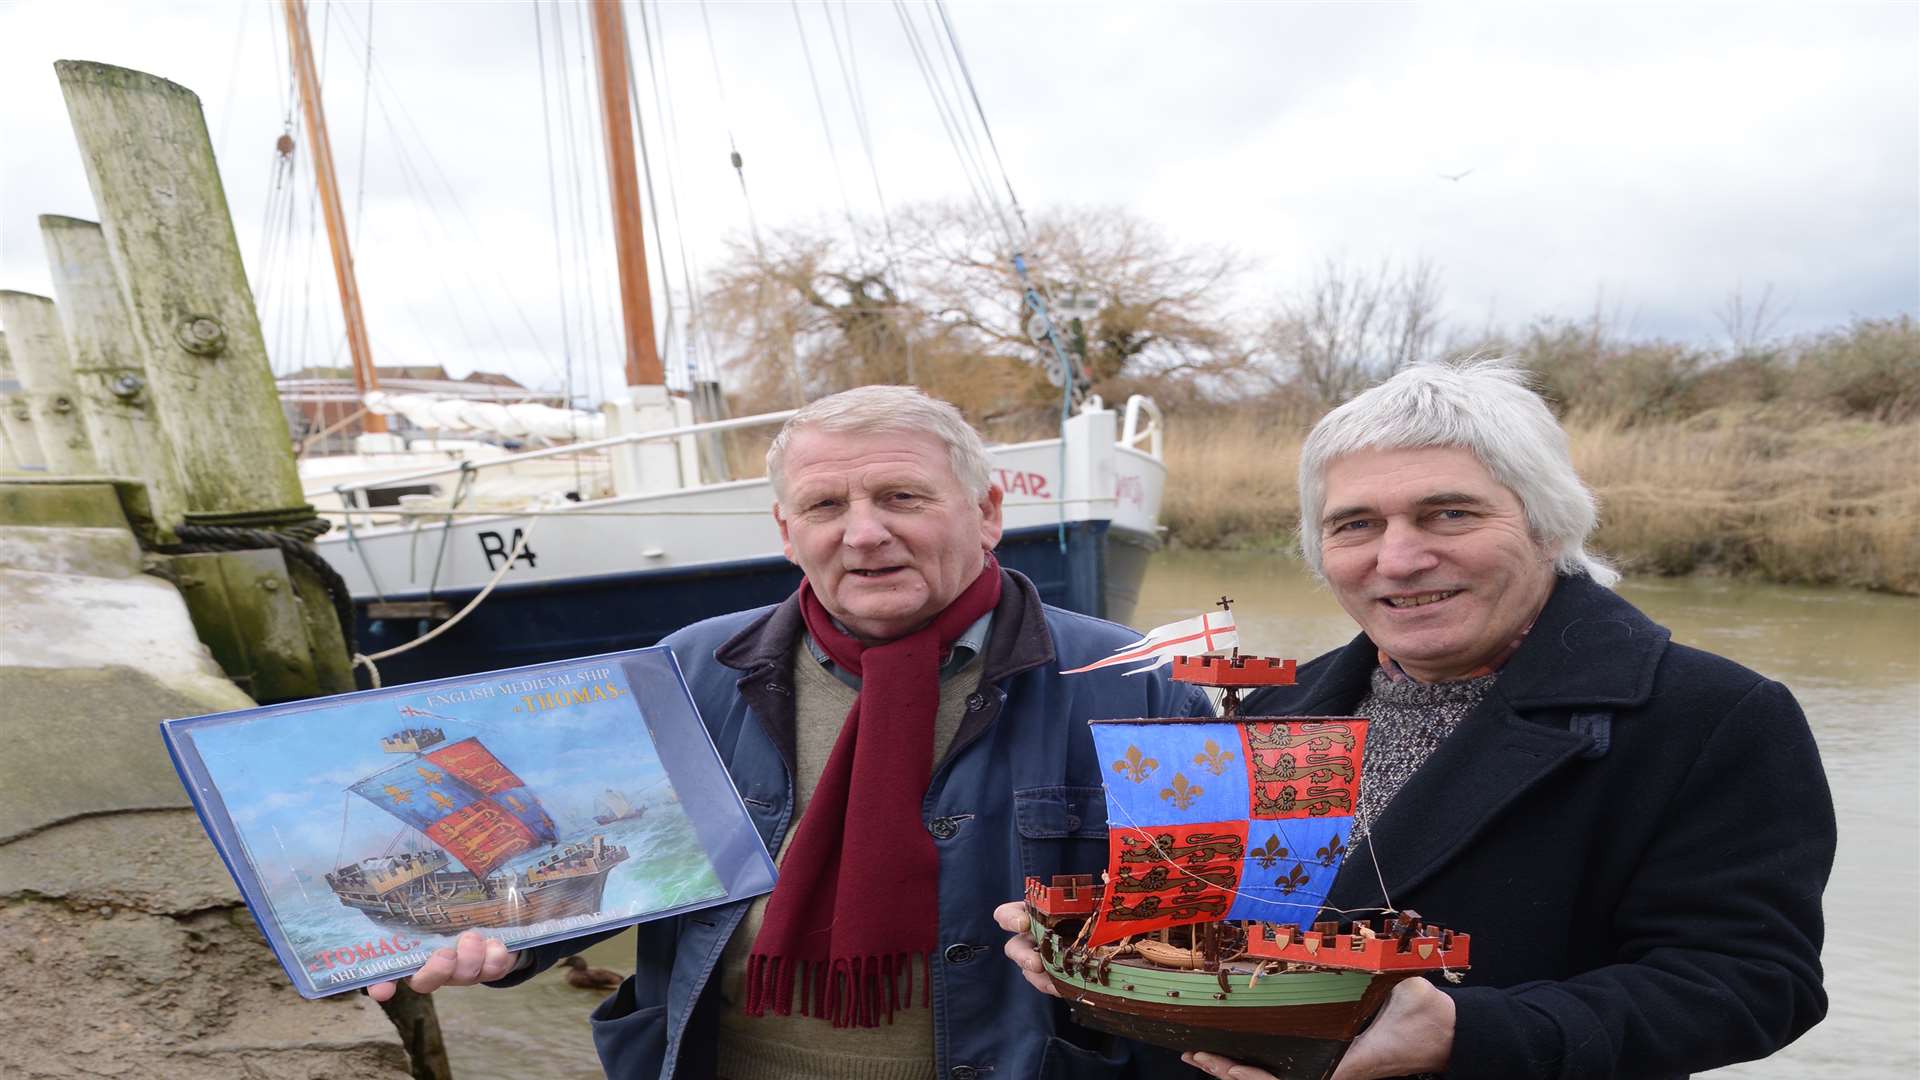 Shipwright, Bob Hill and Bob Martin who plan to build a medieval ship and visitor centre on Sandwich Quay